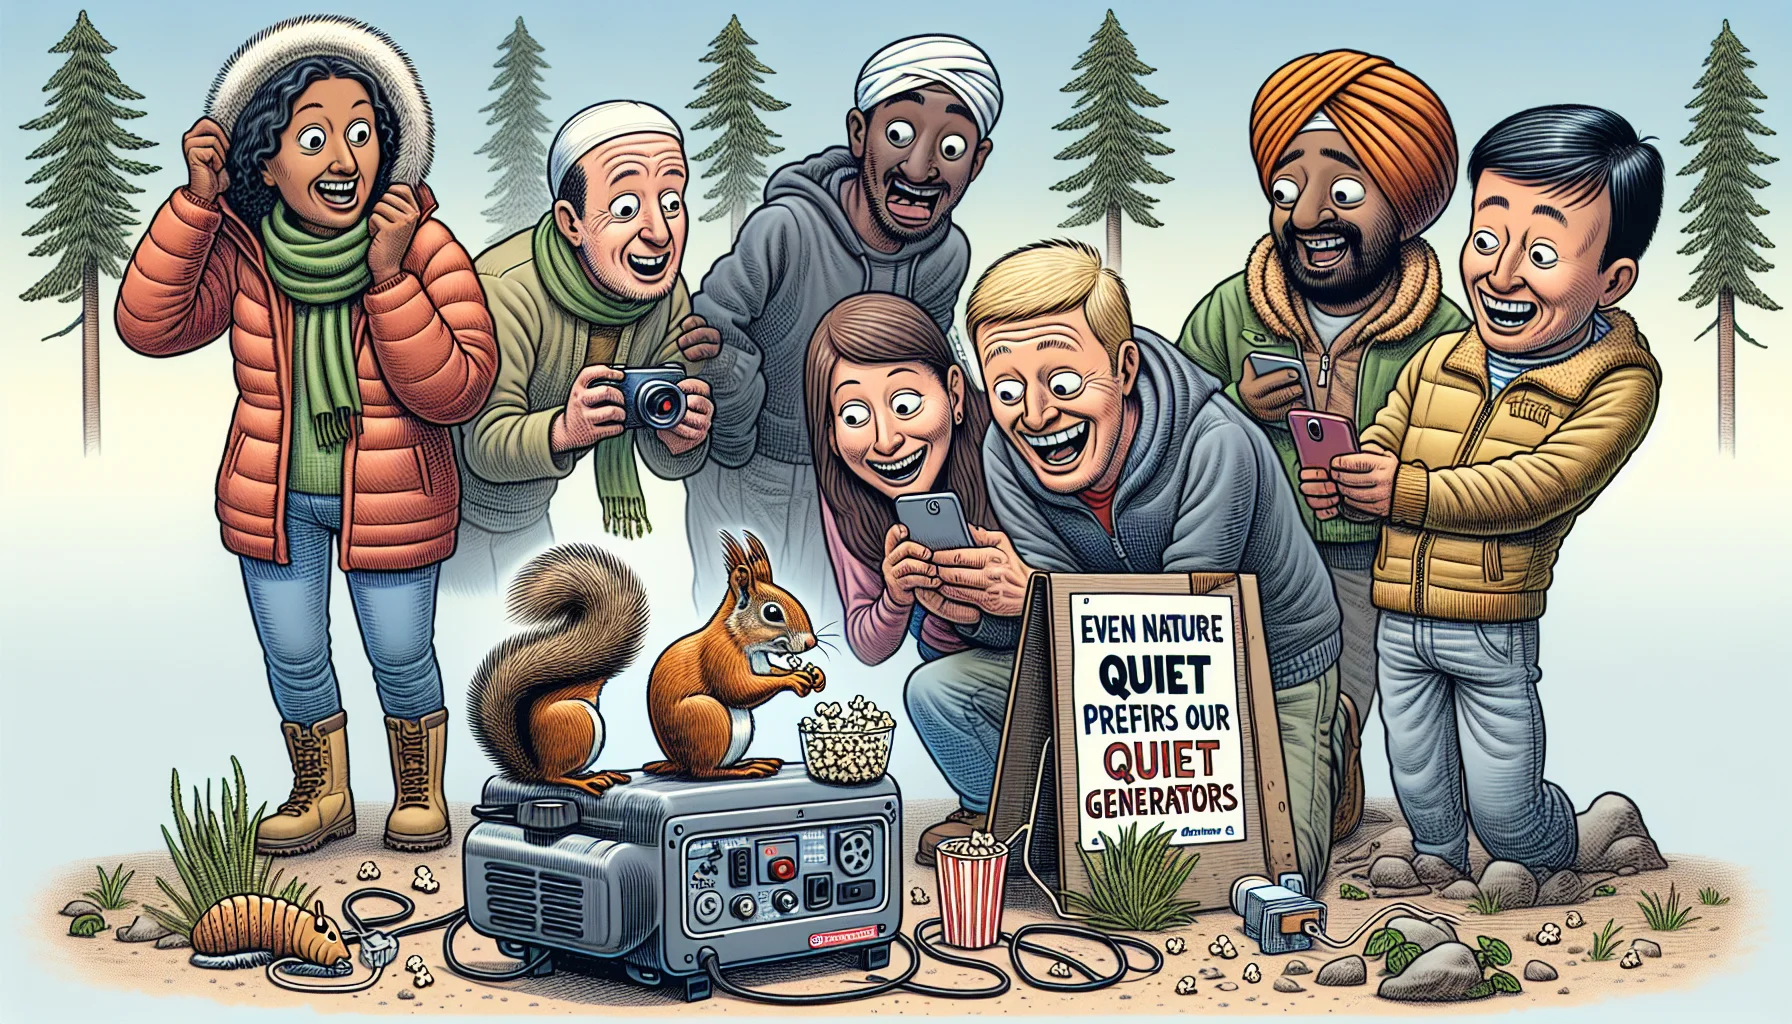 Draw an amusing scene set in an outdoor camping setting with diverse people of different genders and descents. A Caucasian woman and a Black man are curiously observing a squirrel ingeniously using a miniature quiet generator to make some popcorn, while a laughing Middle-Eastern man is filming the scenario on his cell phone. A South Asian woman is showing a poster that humorously says 'Even Nature Prefers Our Quiet Generators'. Their Asian male friend is excitedly showing the socket on the generator where they can plug their devices. This image is intended to humorously promote the concept of quiet generators for electricity production.